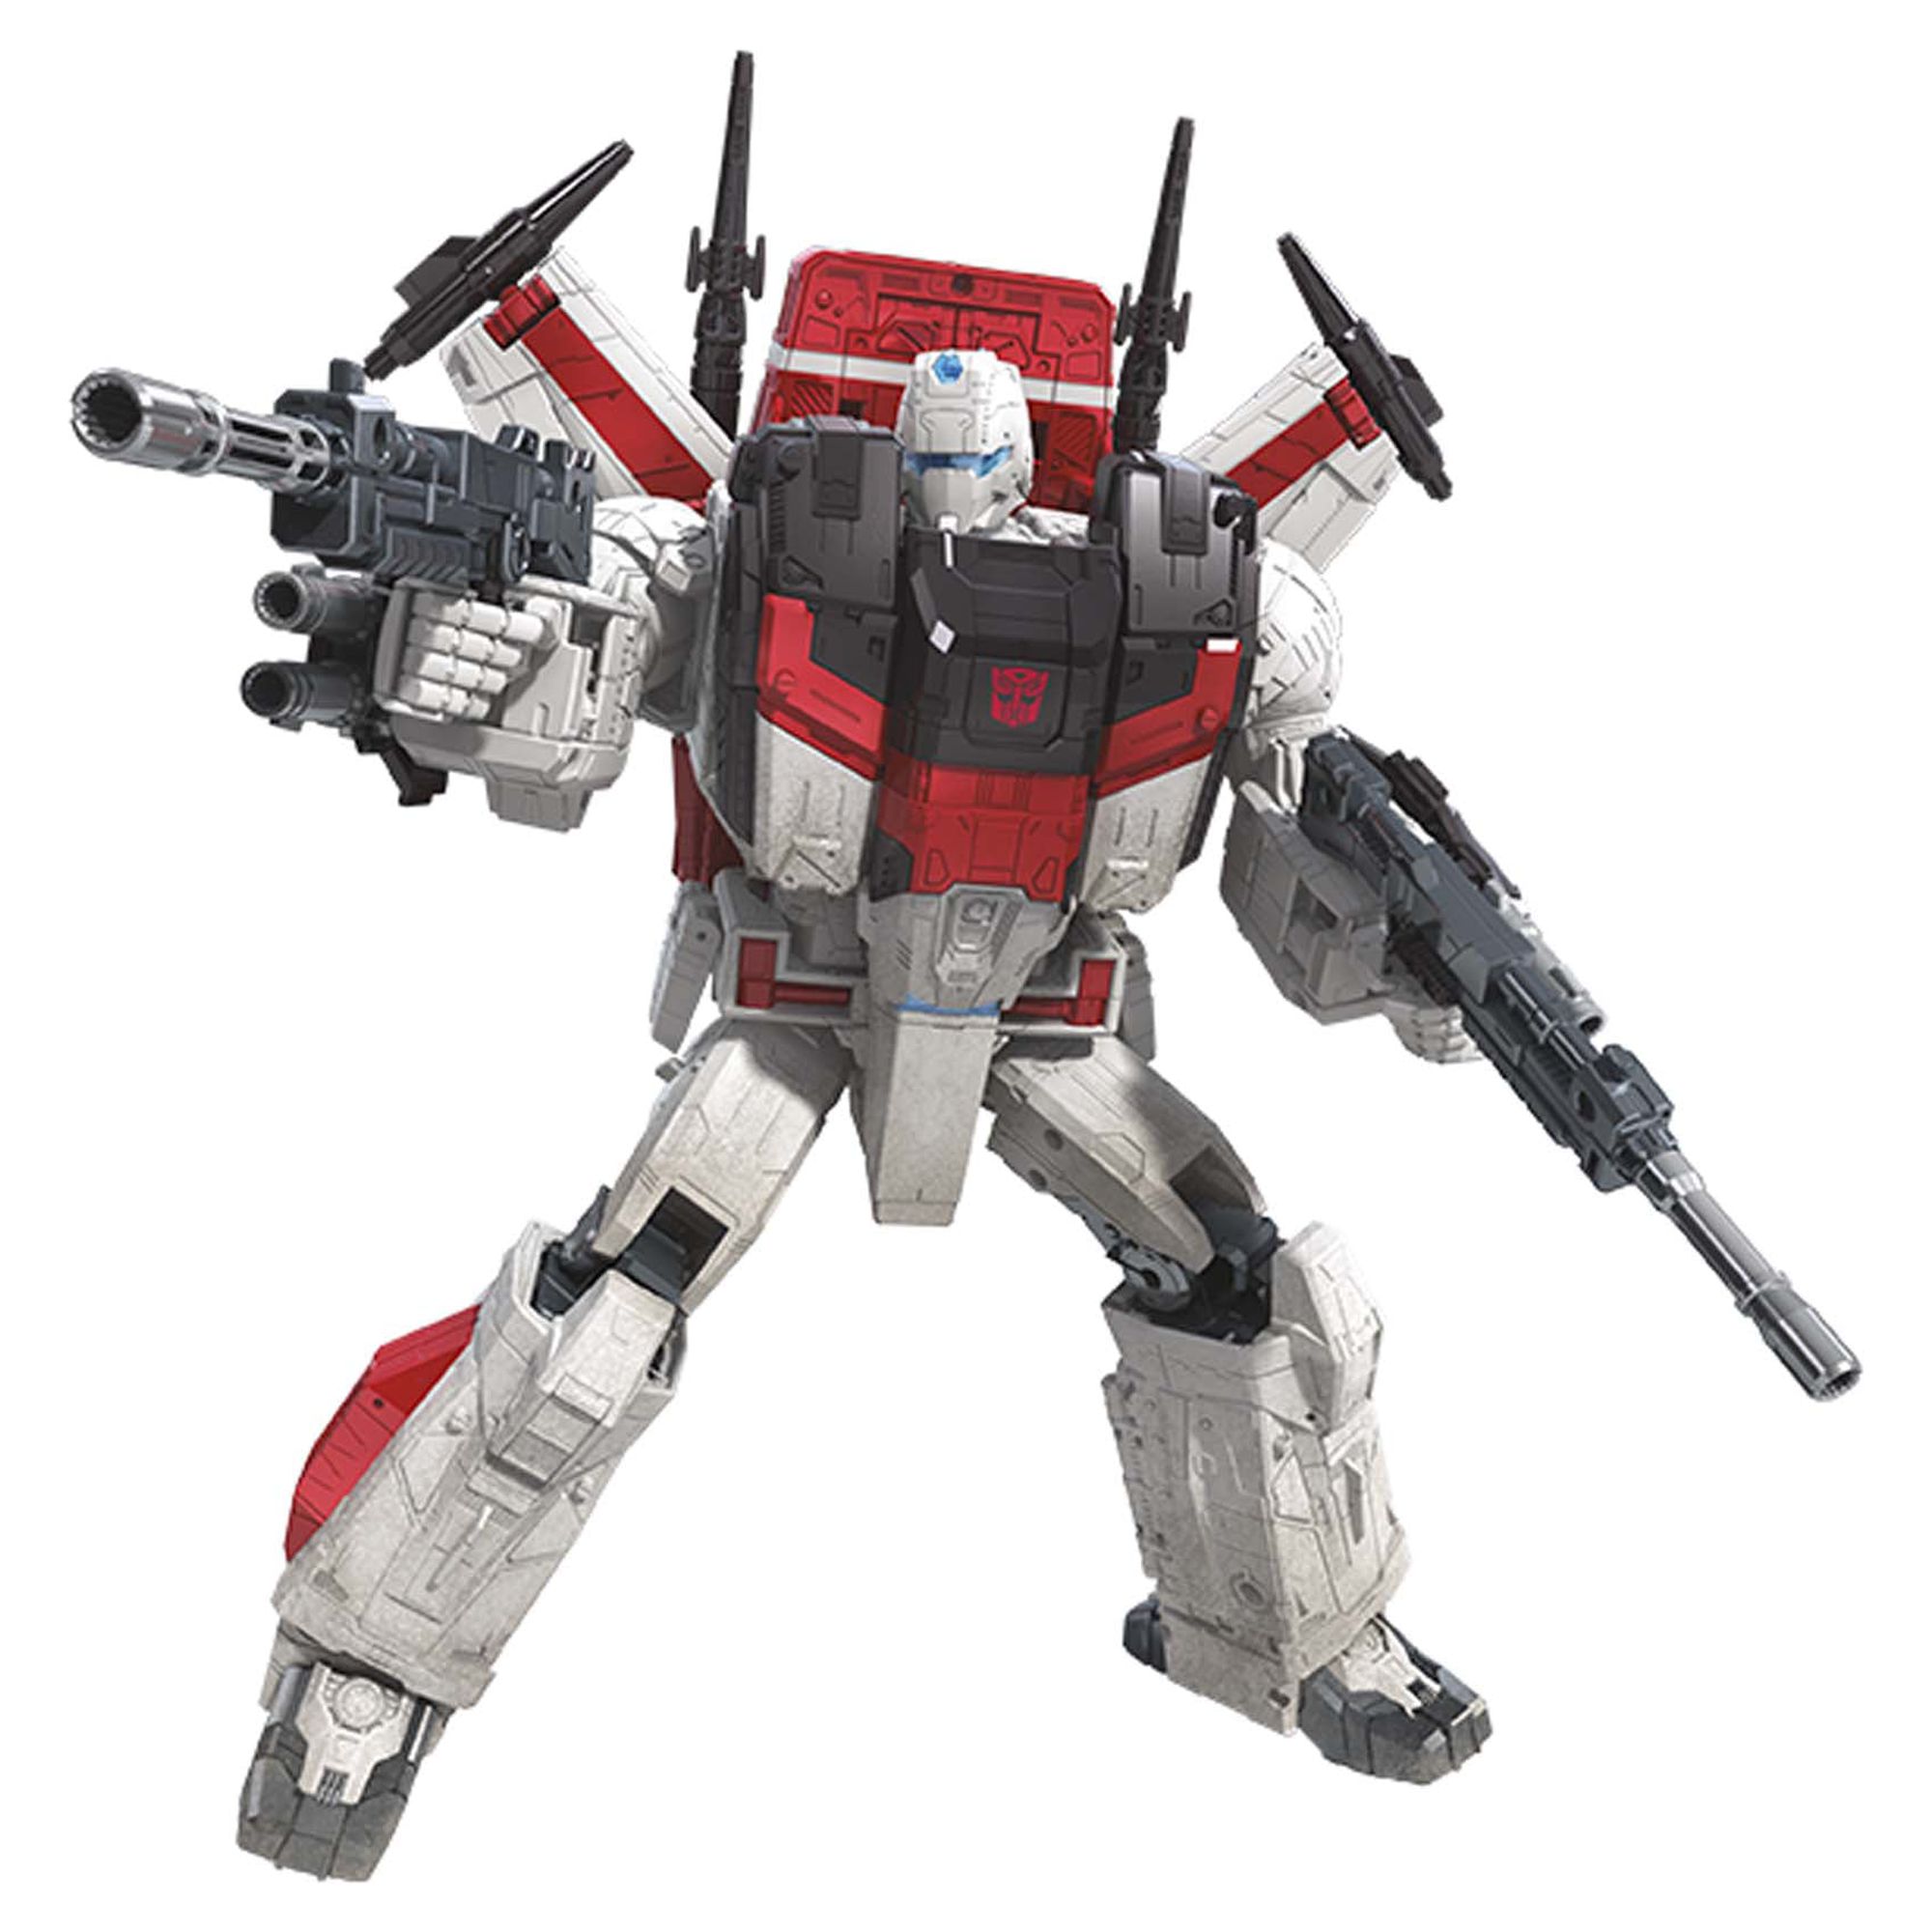 Transformers Generations War for Cybertron Commander WFC-S28 Jetfire Figure - image 2 of 13